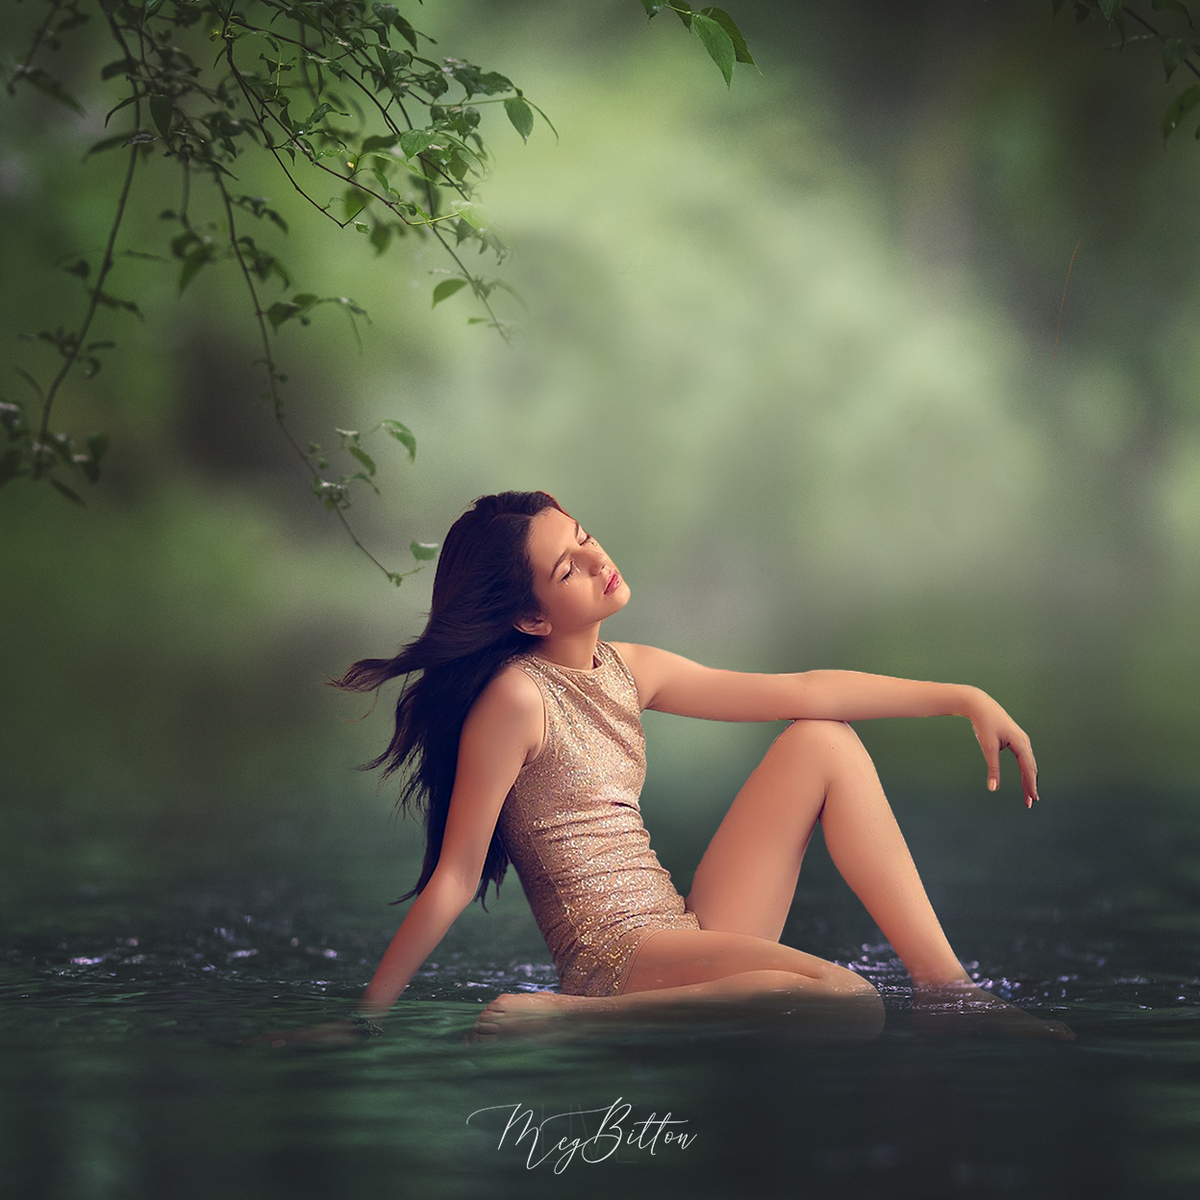 Simple Composite Creation - Placing Subjects in Water - Meg Bitton Productions